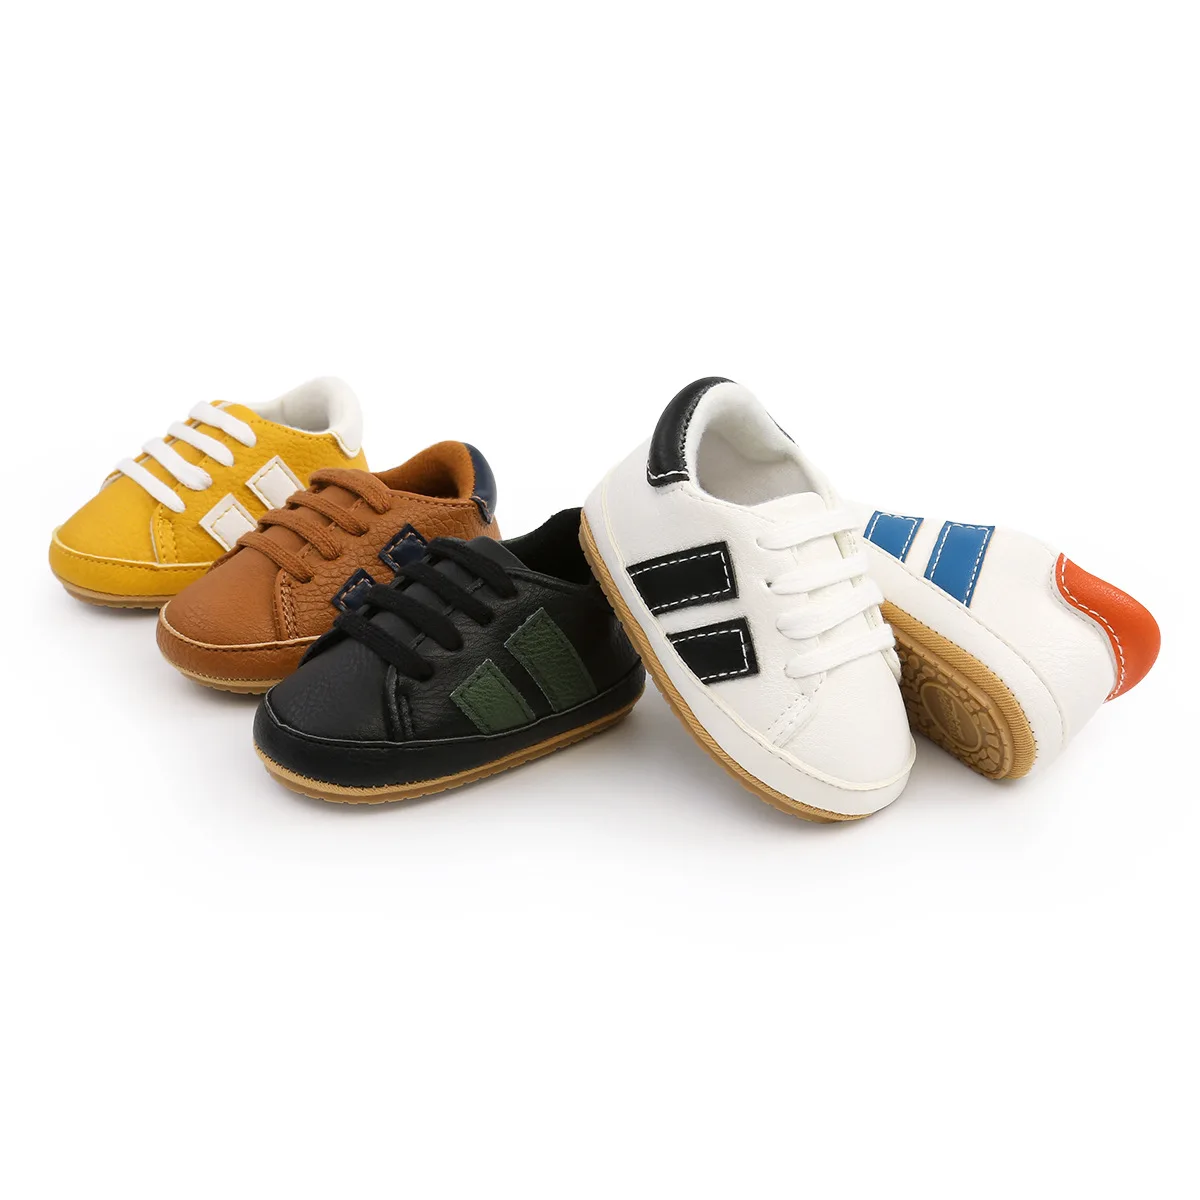 

2020 Sport Style Mixed Color Antiskid TPR Sole Baby Shoes New Walking baby shoes, White/blue/yellow/brown/black